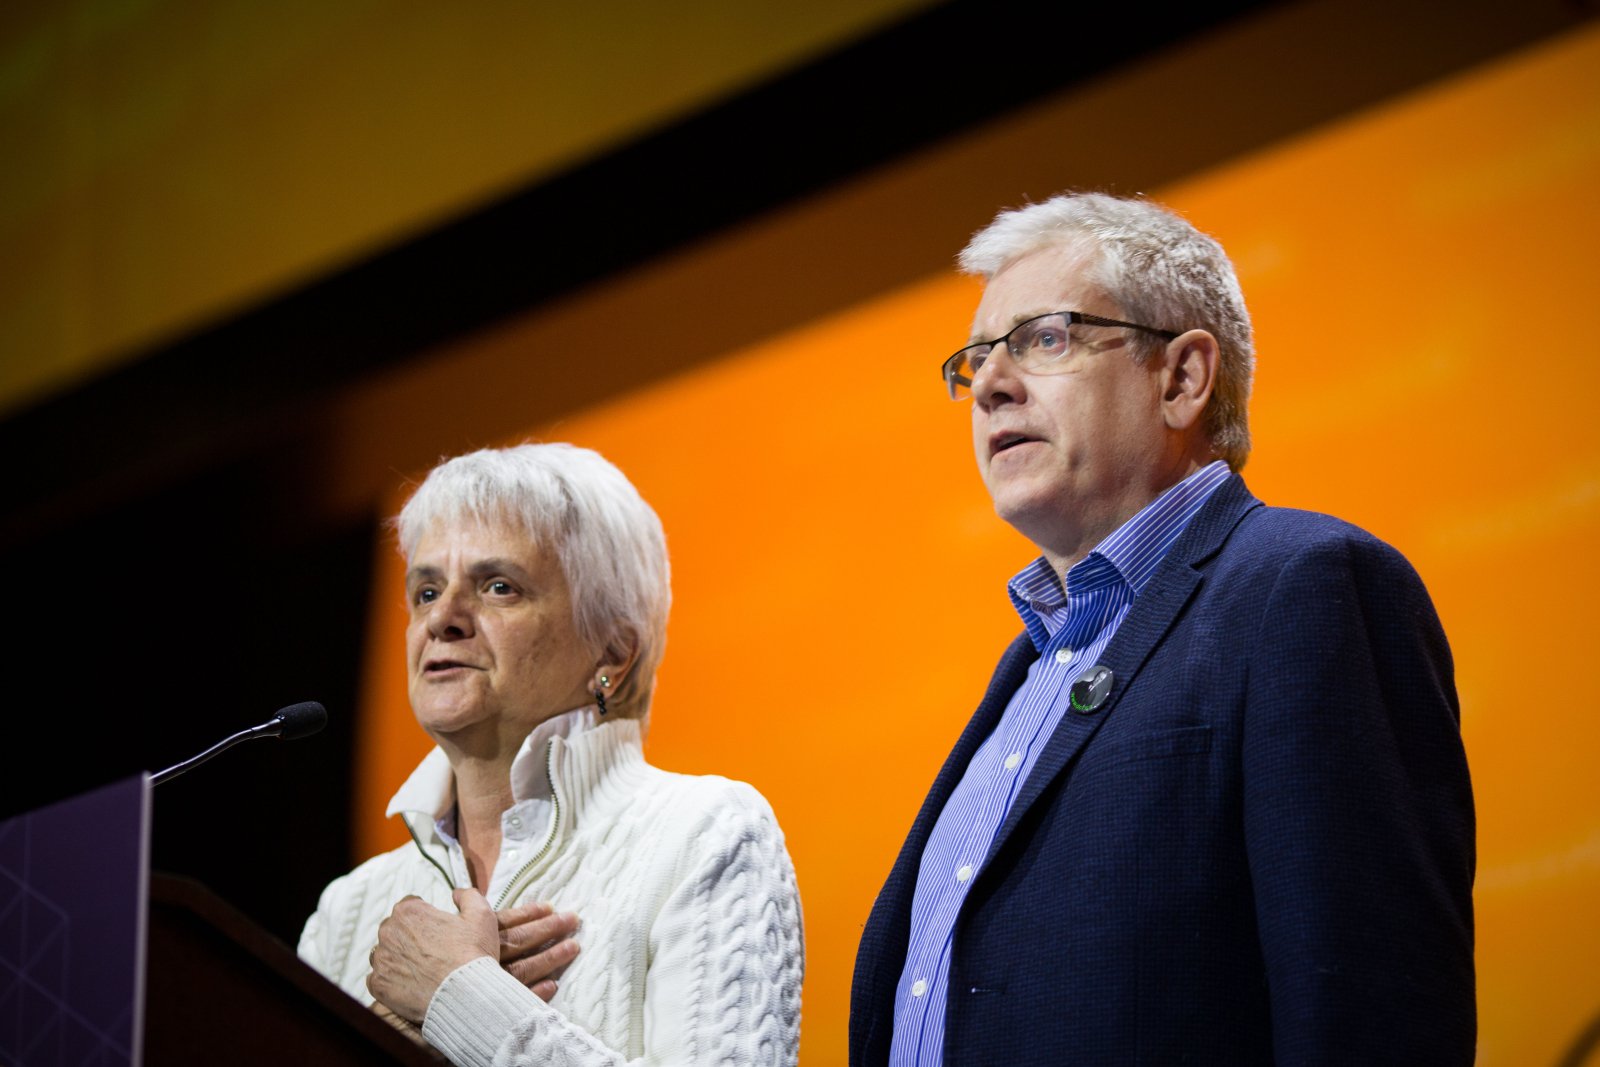 NDP MPs Charlie Angus and Helene Laverdiere speak to NDP delegates about Paul Dewar's brain cancer diagnosis in Ottawa on Feb. 17, 2018. Photo by Alex Tétreault